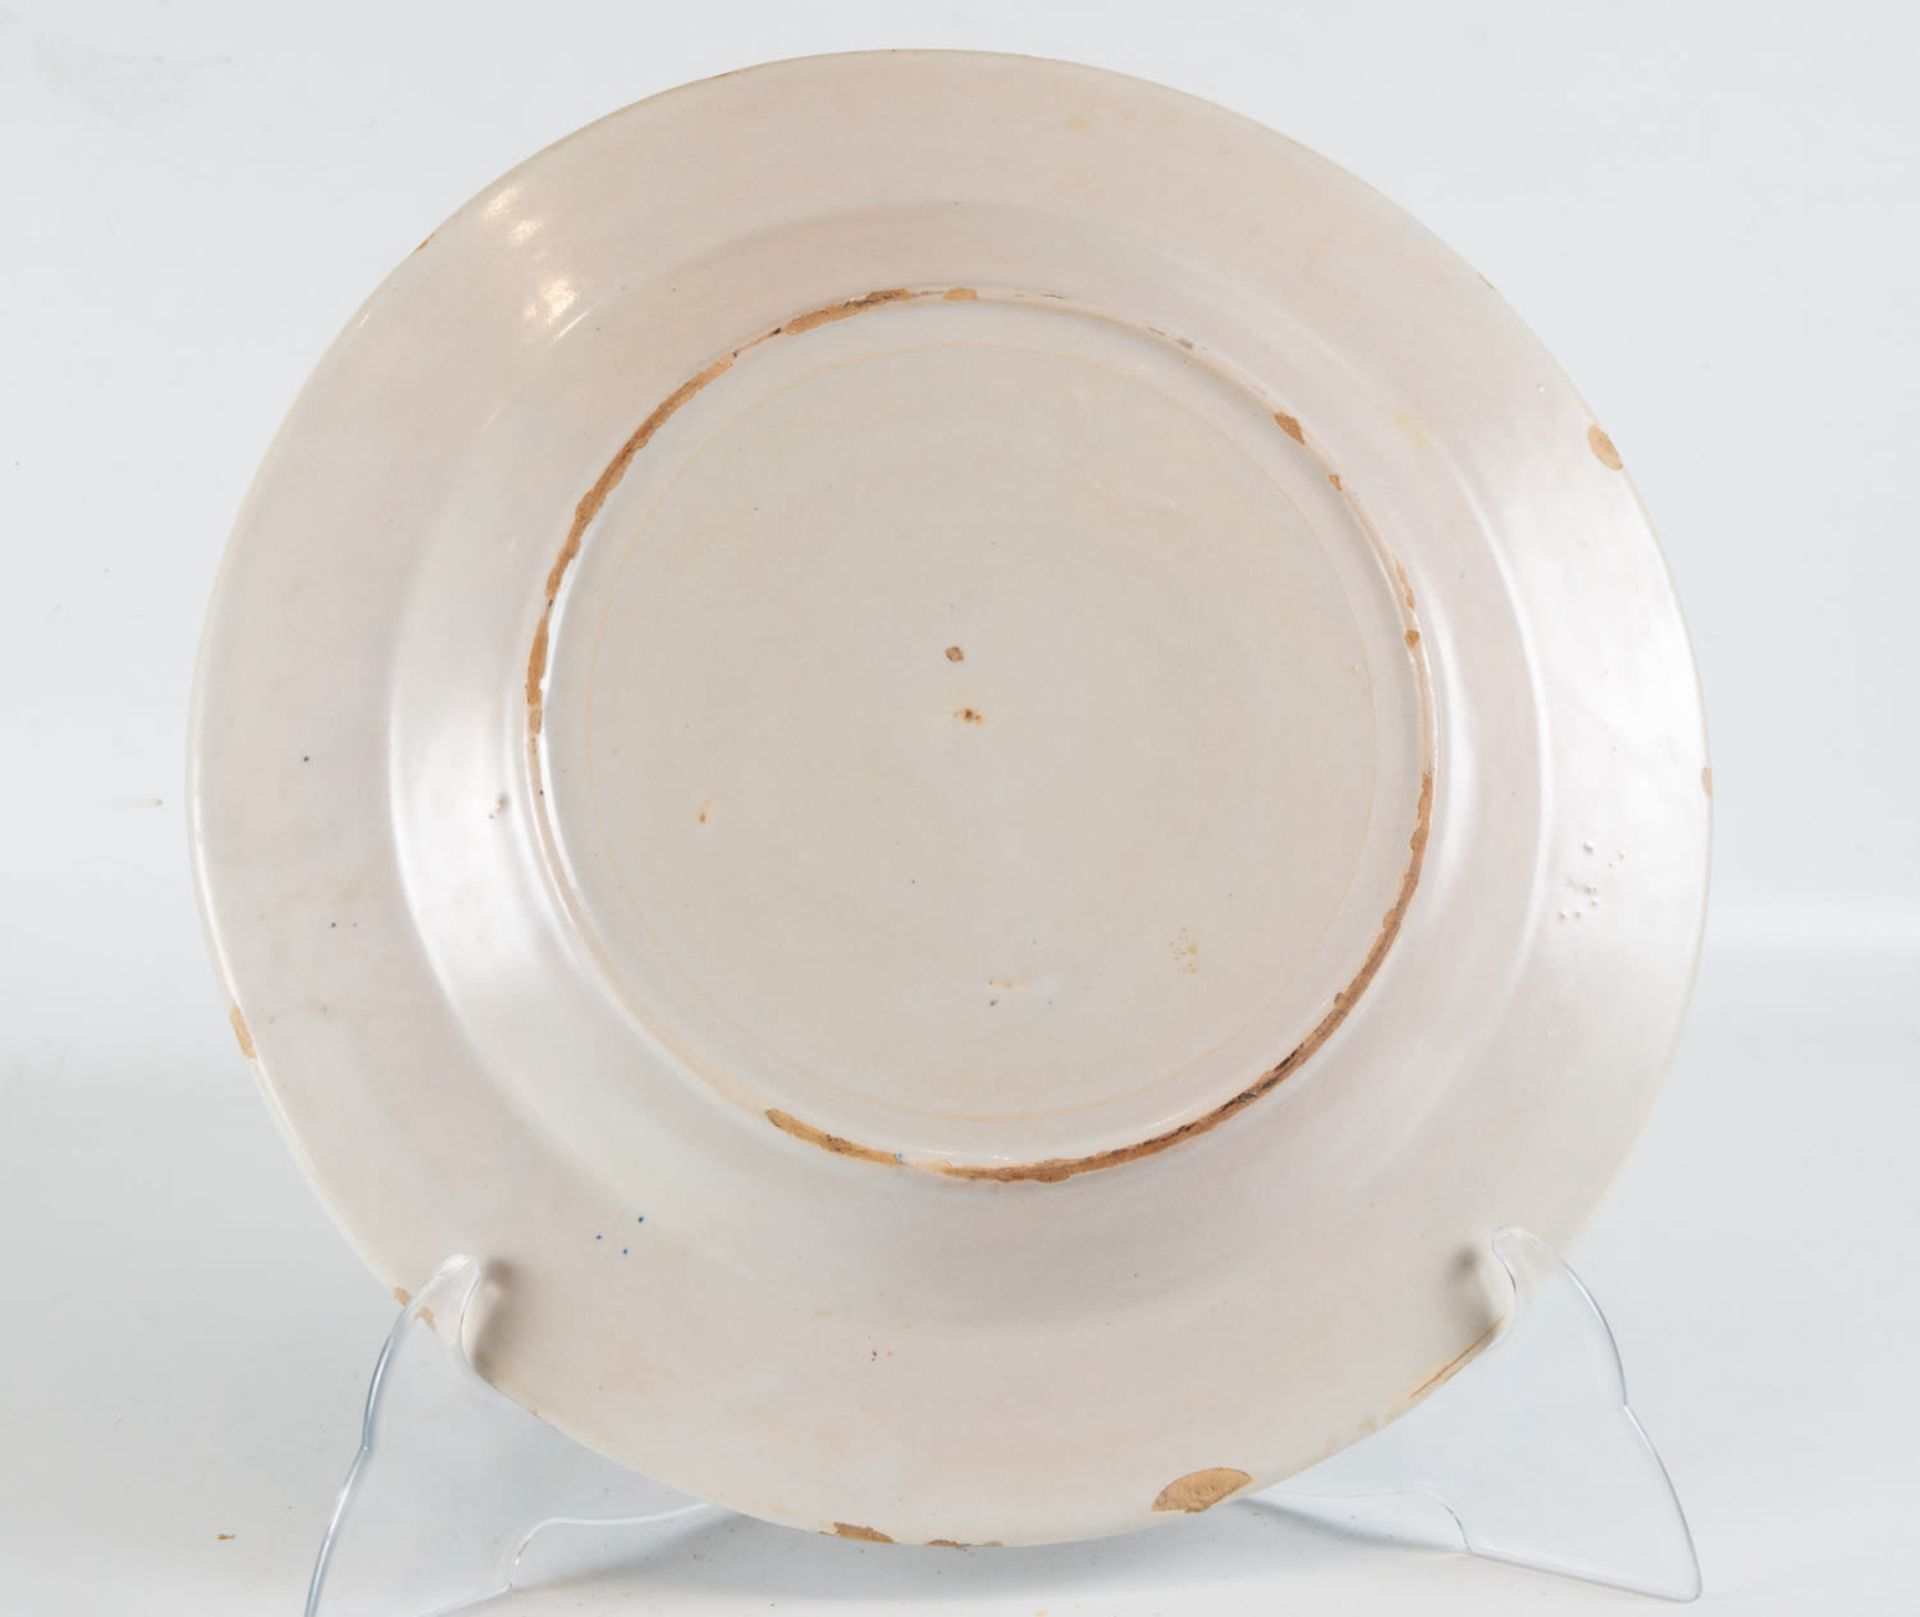 Ceramic plate from Manises, 20th century - Image 3 of 3